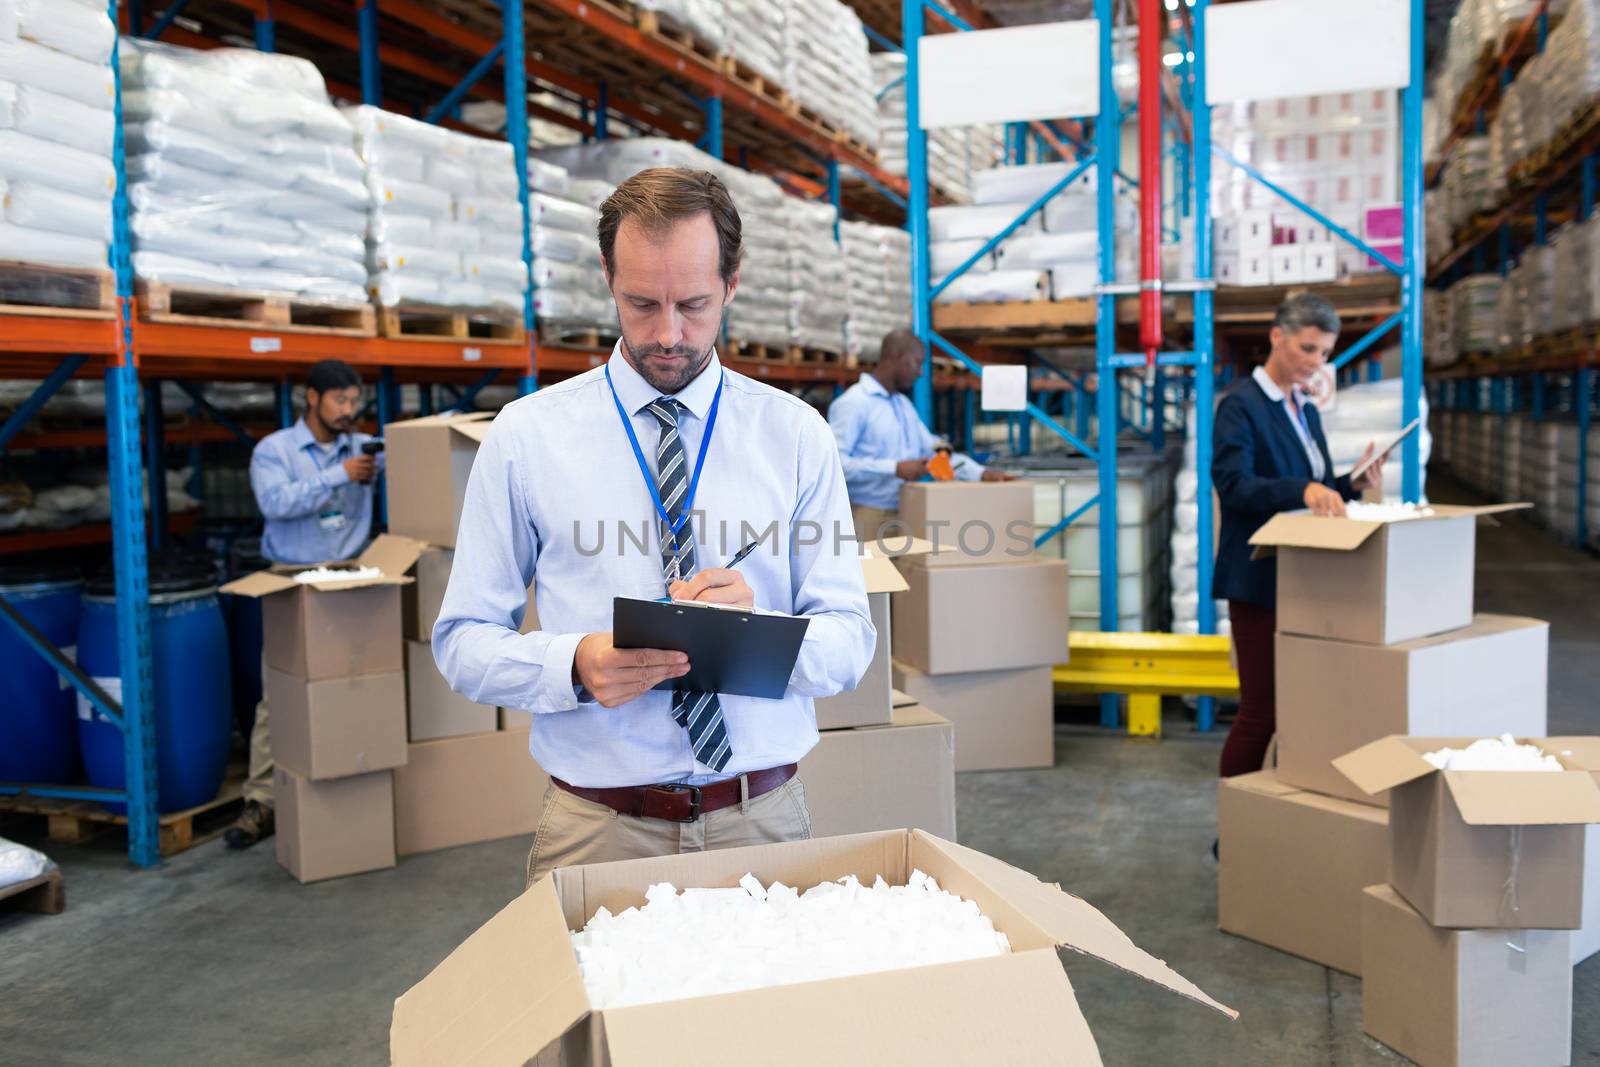 Front view of handsome mature Caucasian male supervisor writing on clipboard in warehouse. Diverse workers checking stock in cardboard boxes behind supervisor. This is a freight transportation and distribution warehouse. Industrial and industrial workers concept